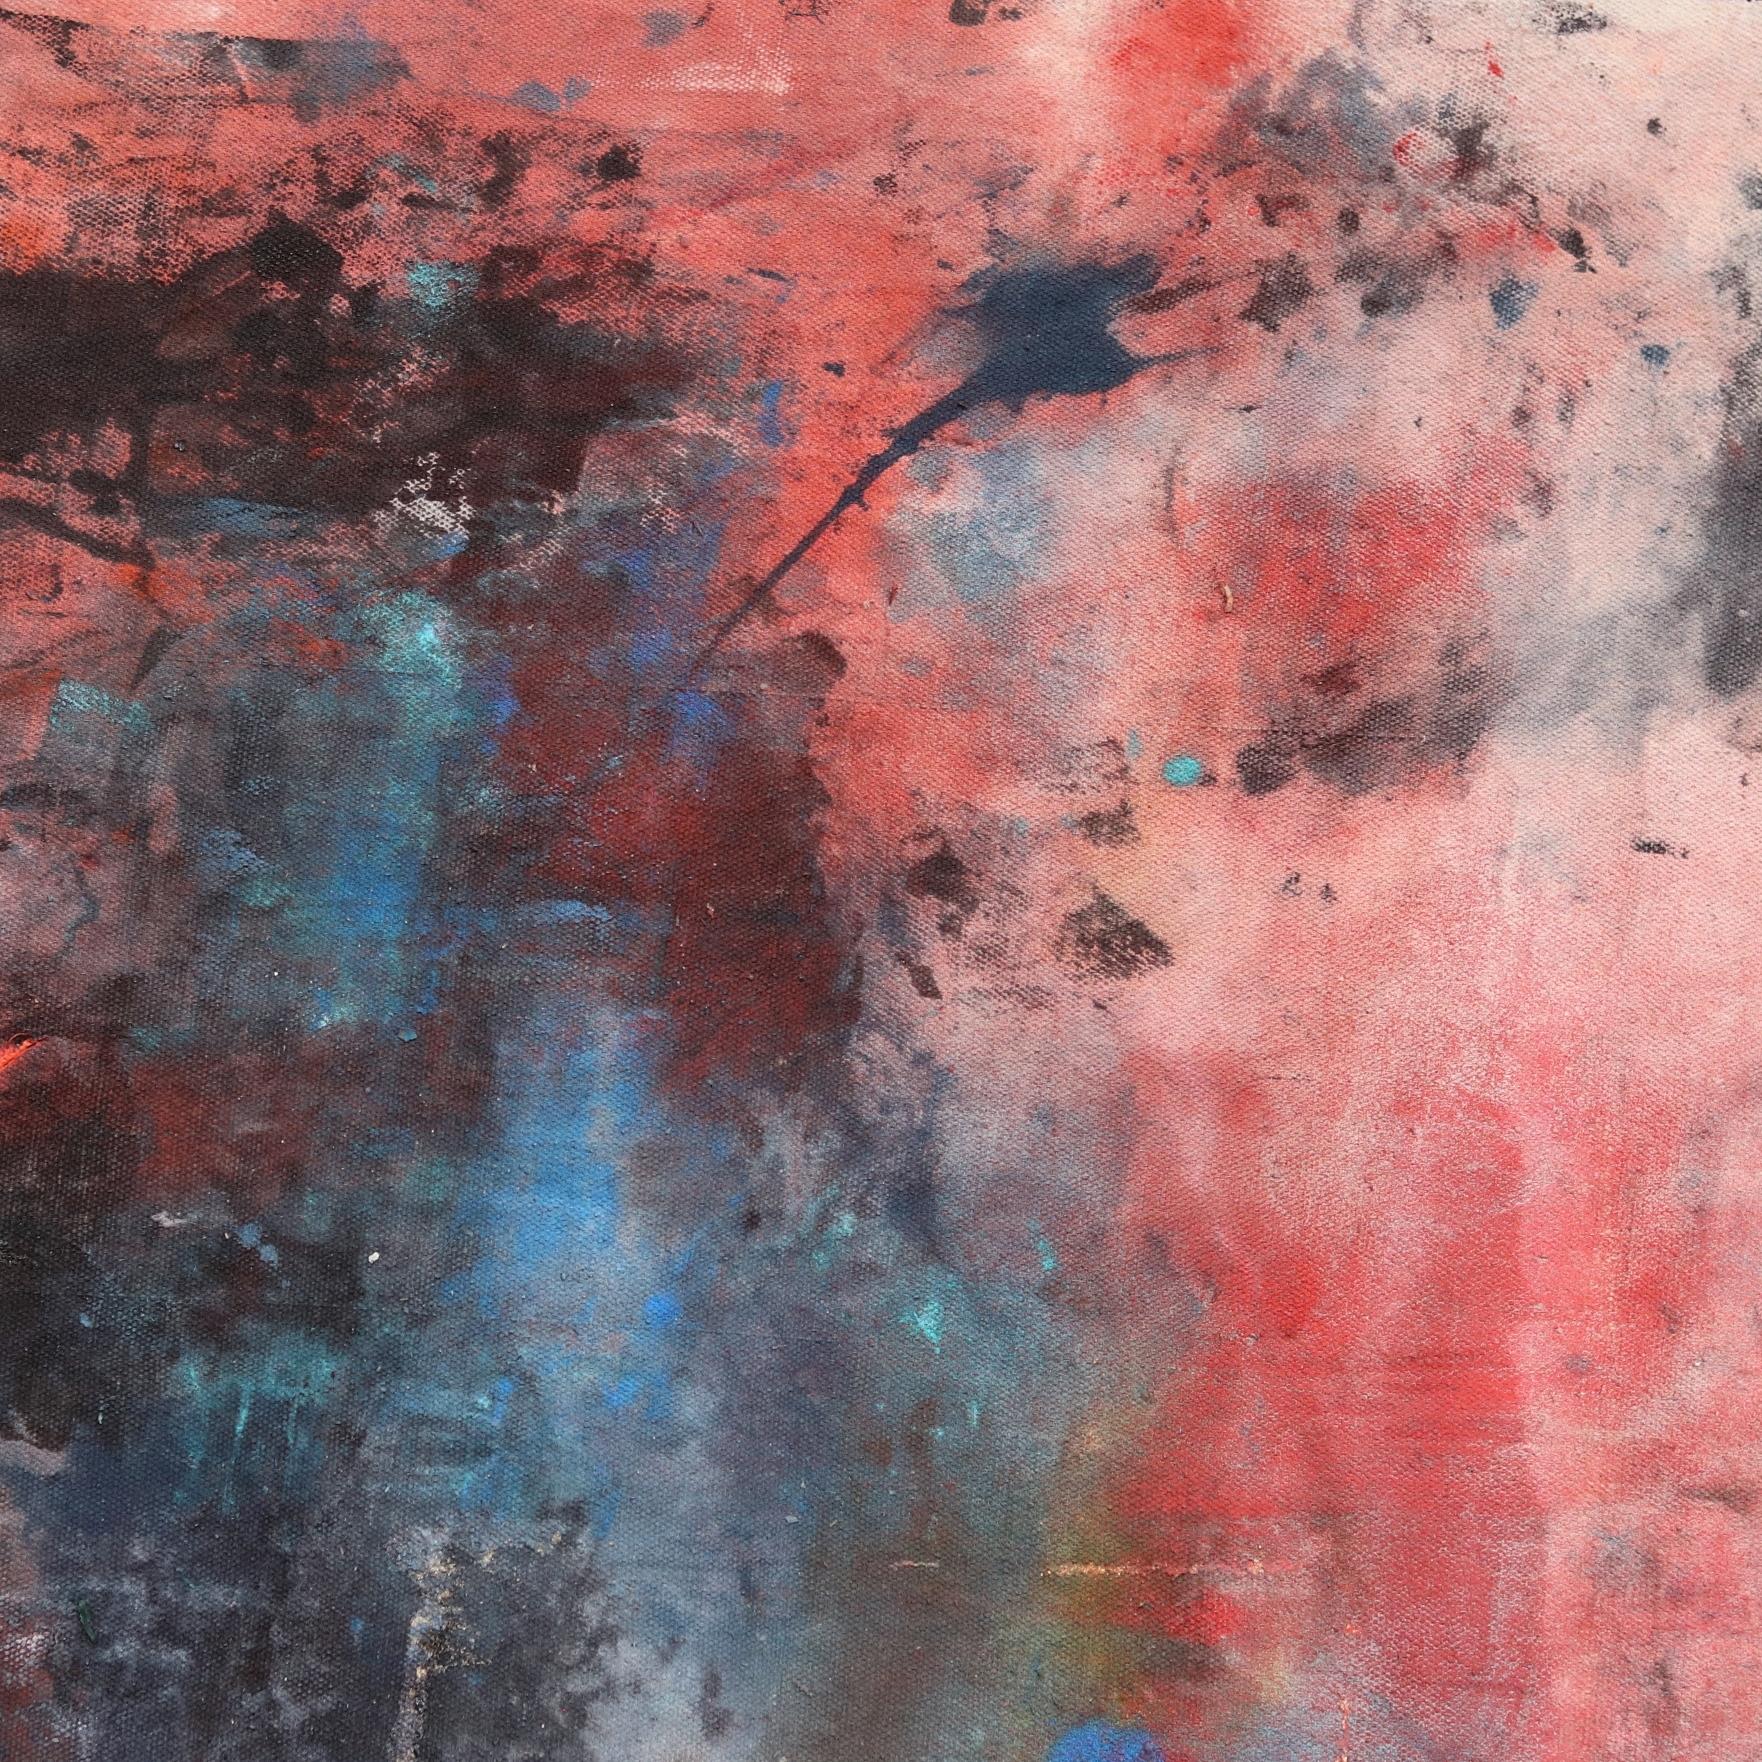 Synthesism I - Large Oversized Expressive Bold Meditative Painting on Canvas - Pink Abstract Painting by Jason DeMeo